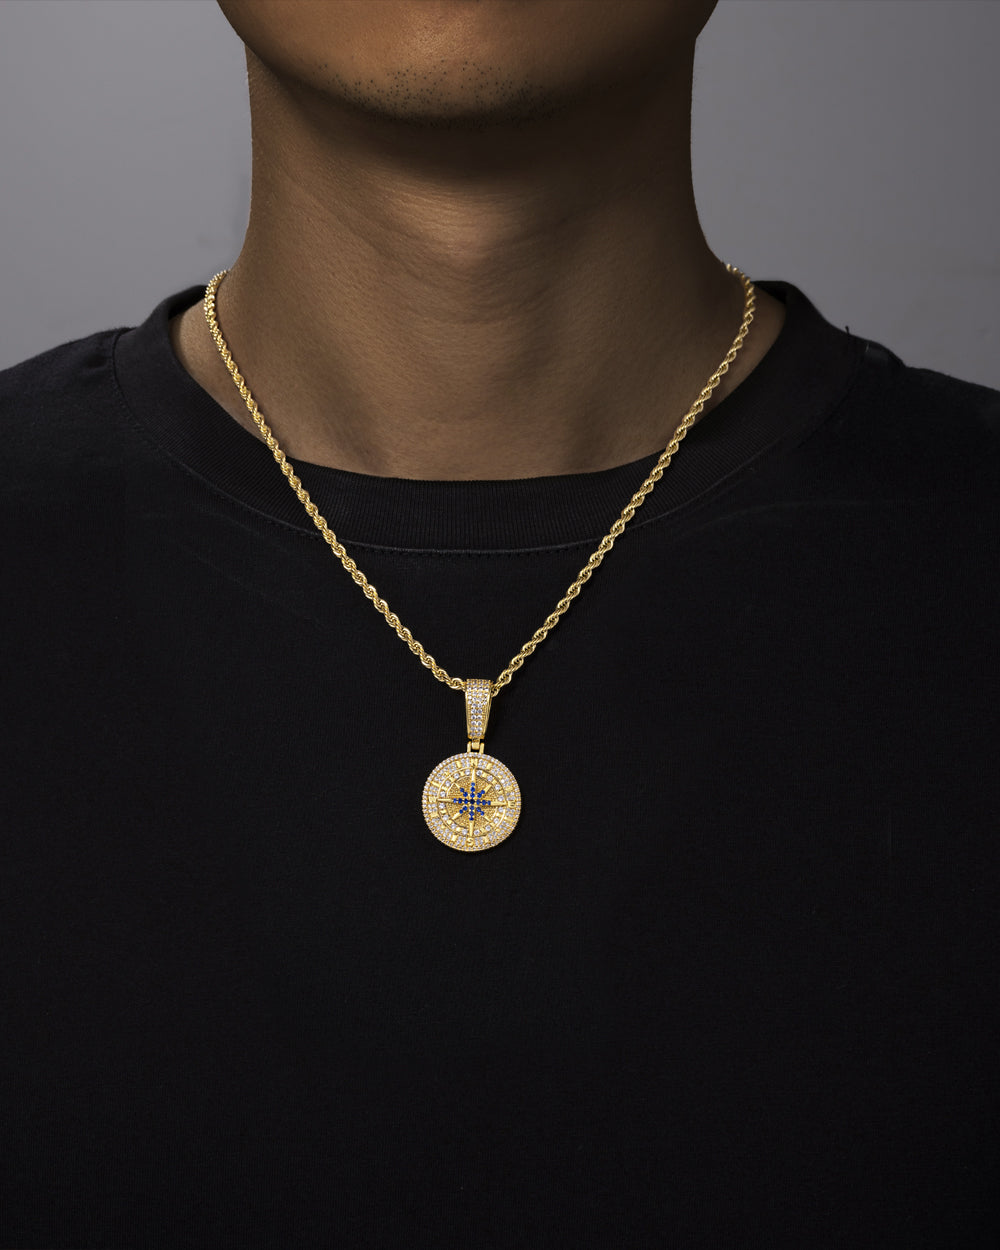 ICED COMPASS PENDANT. - 14K GOLD